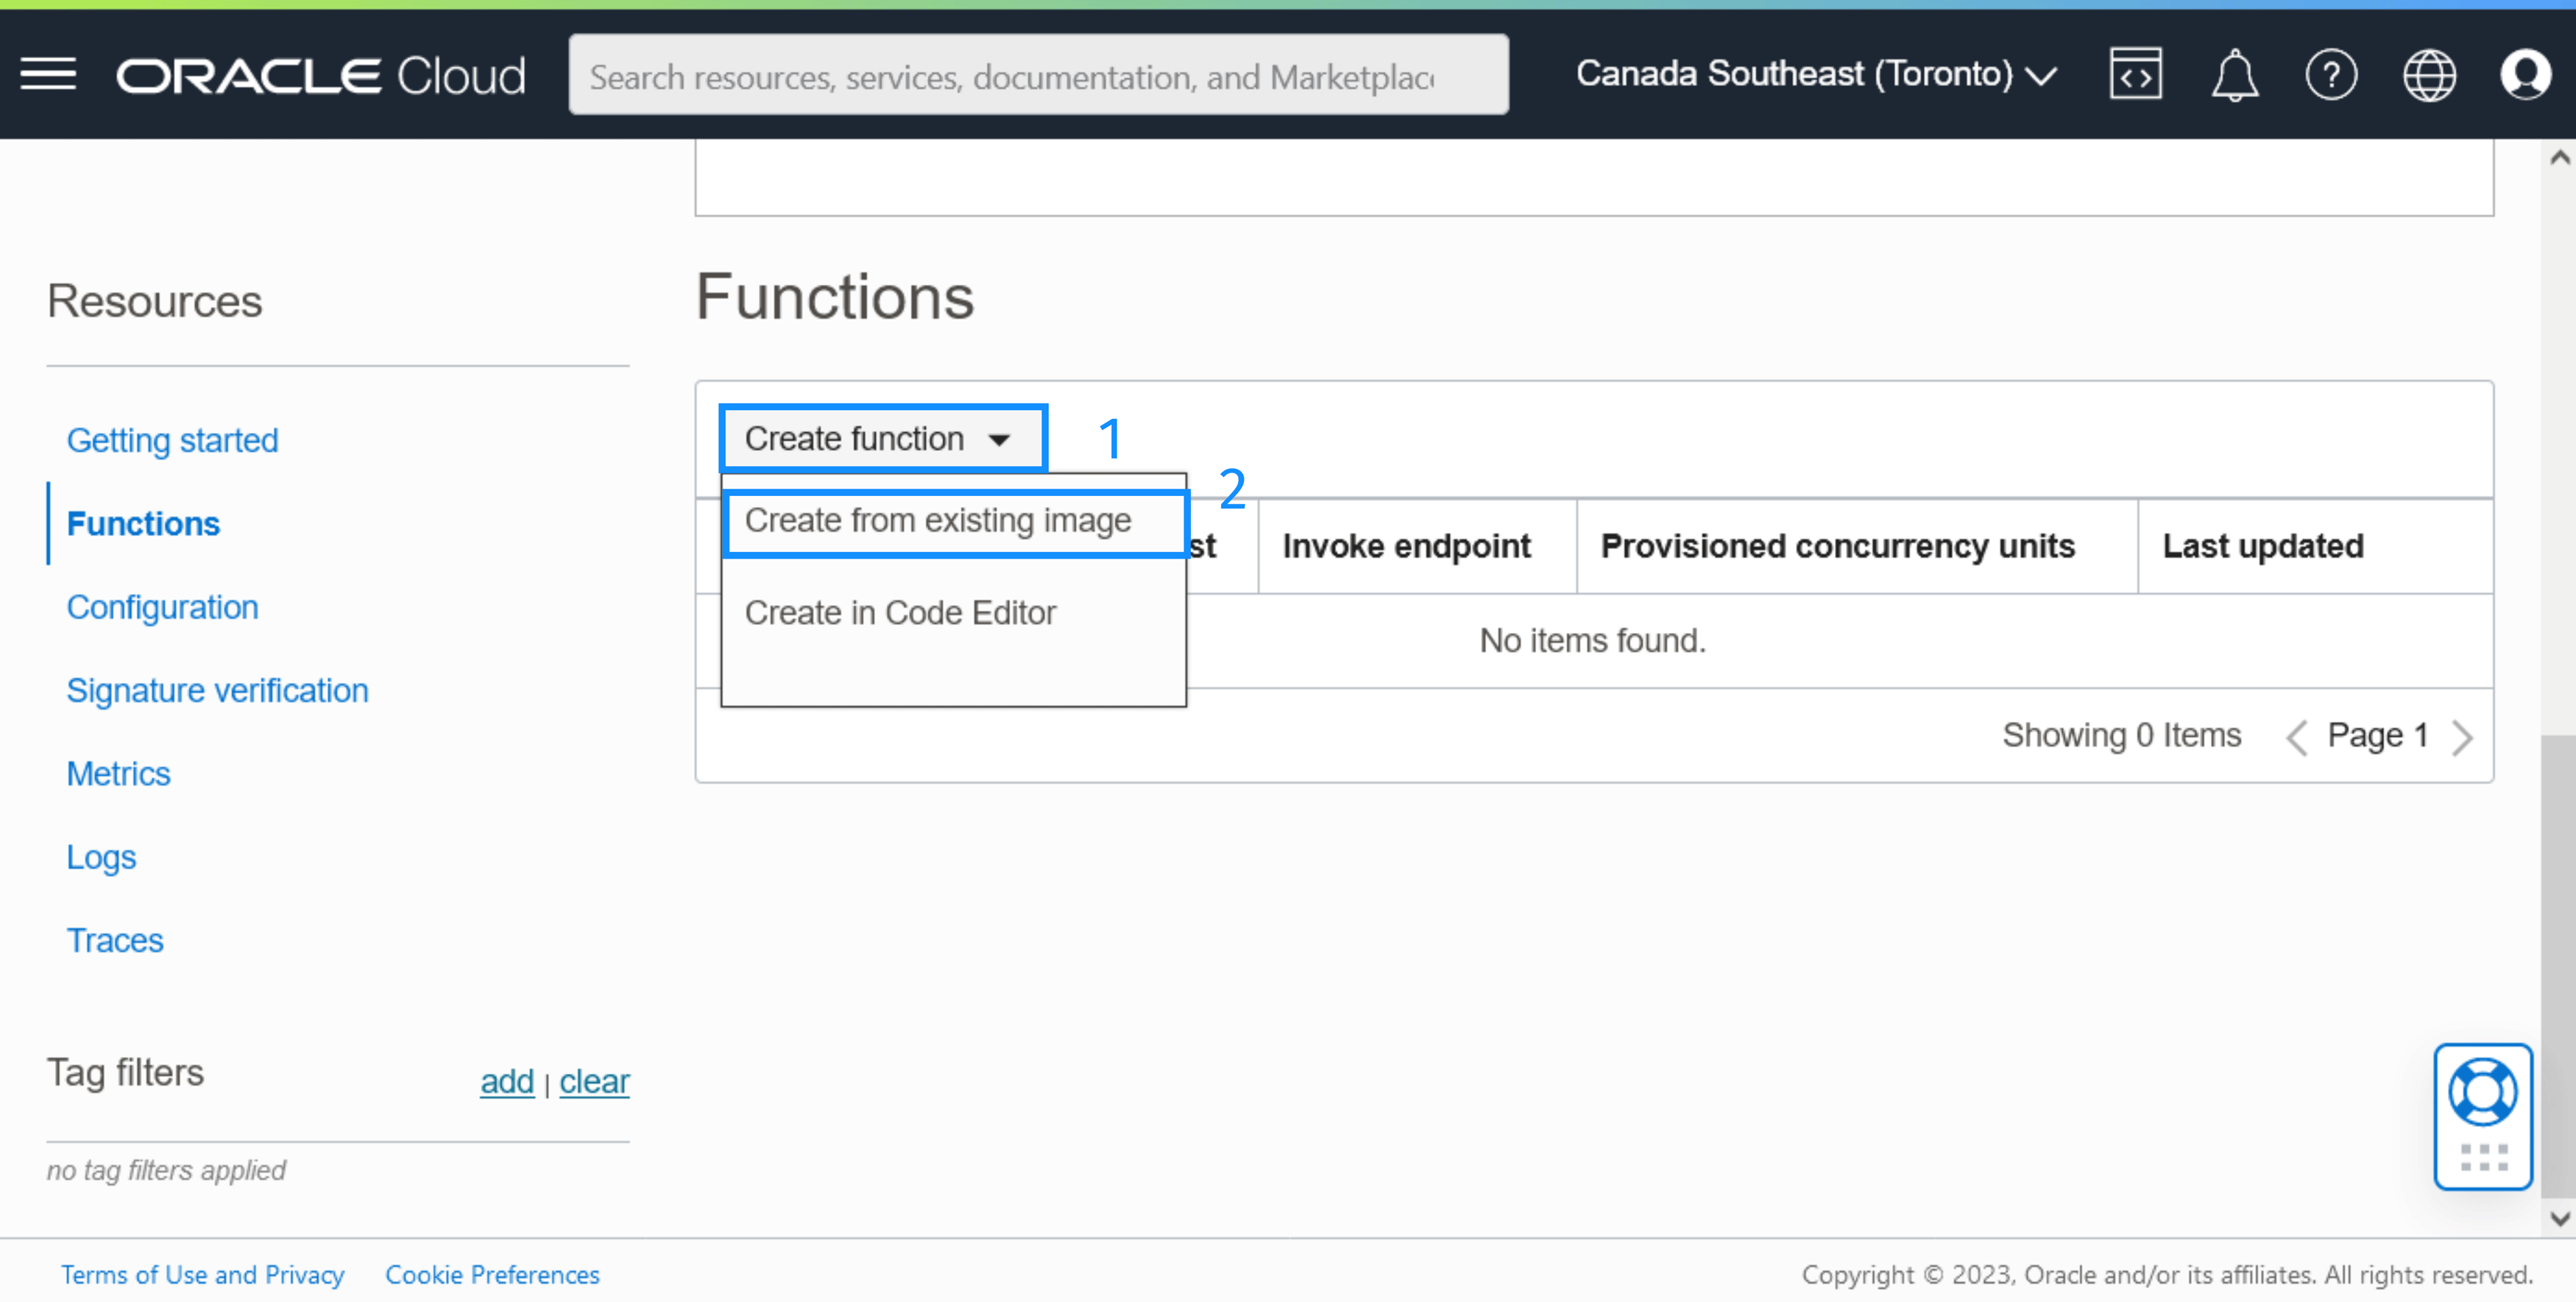 Oracle Cloud Infrastructure Functions